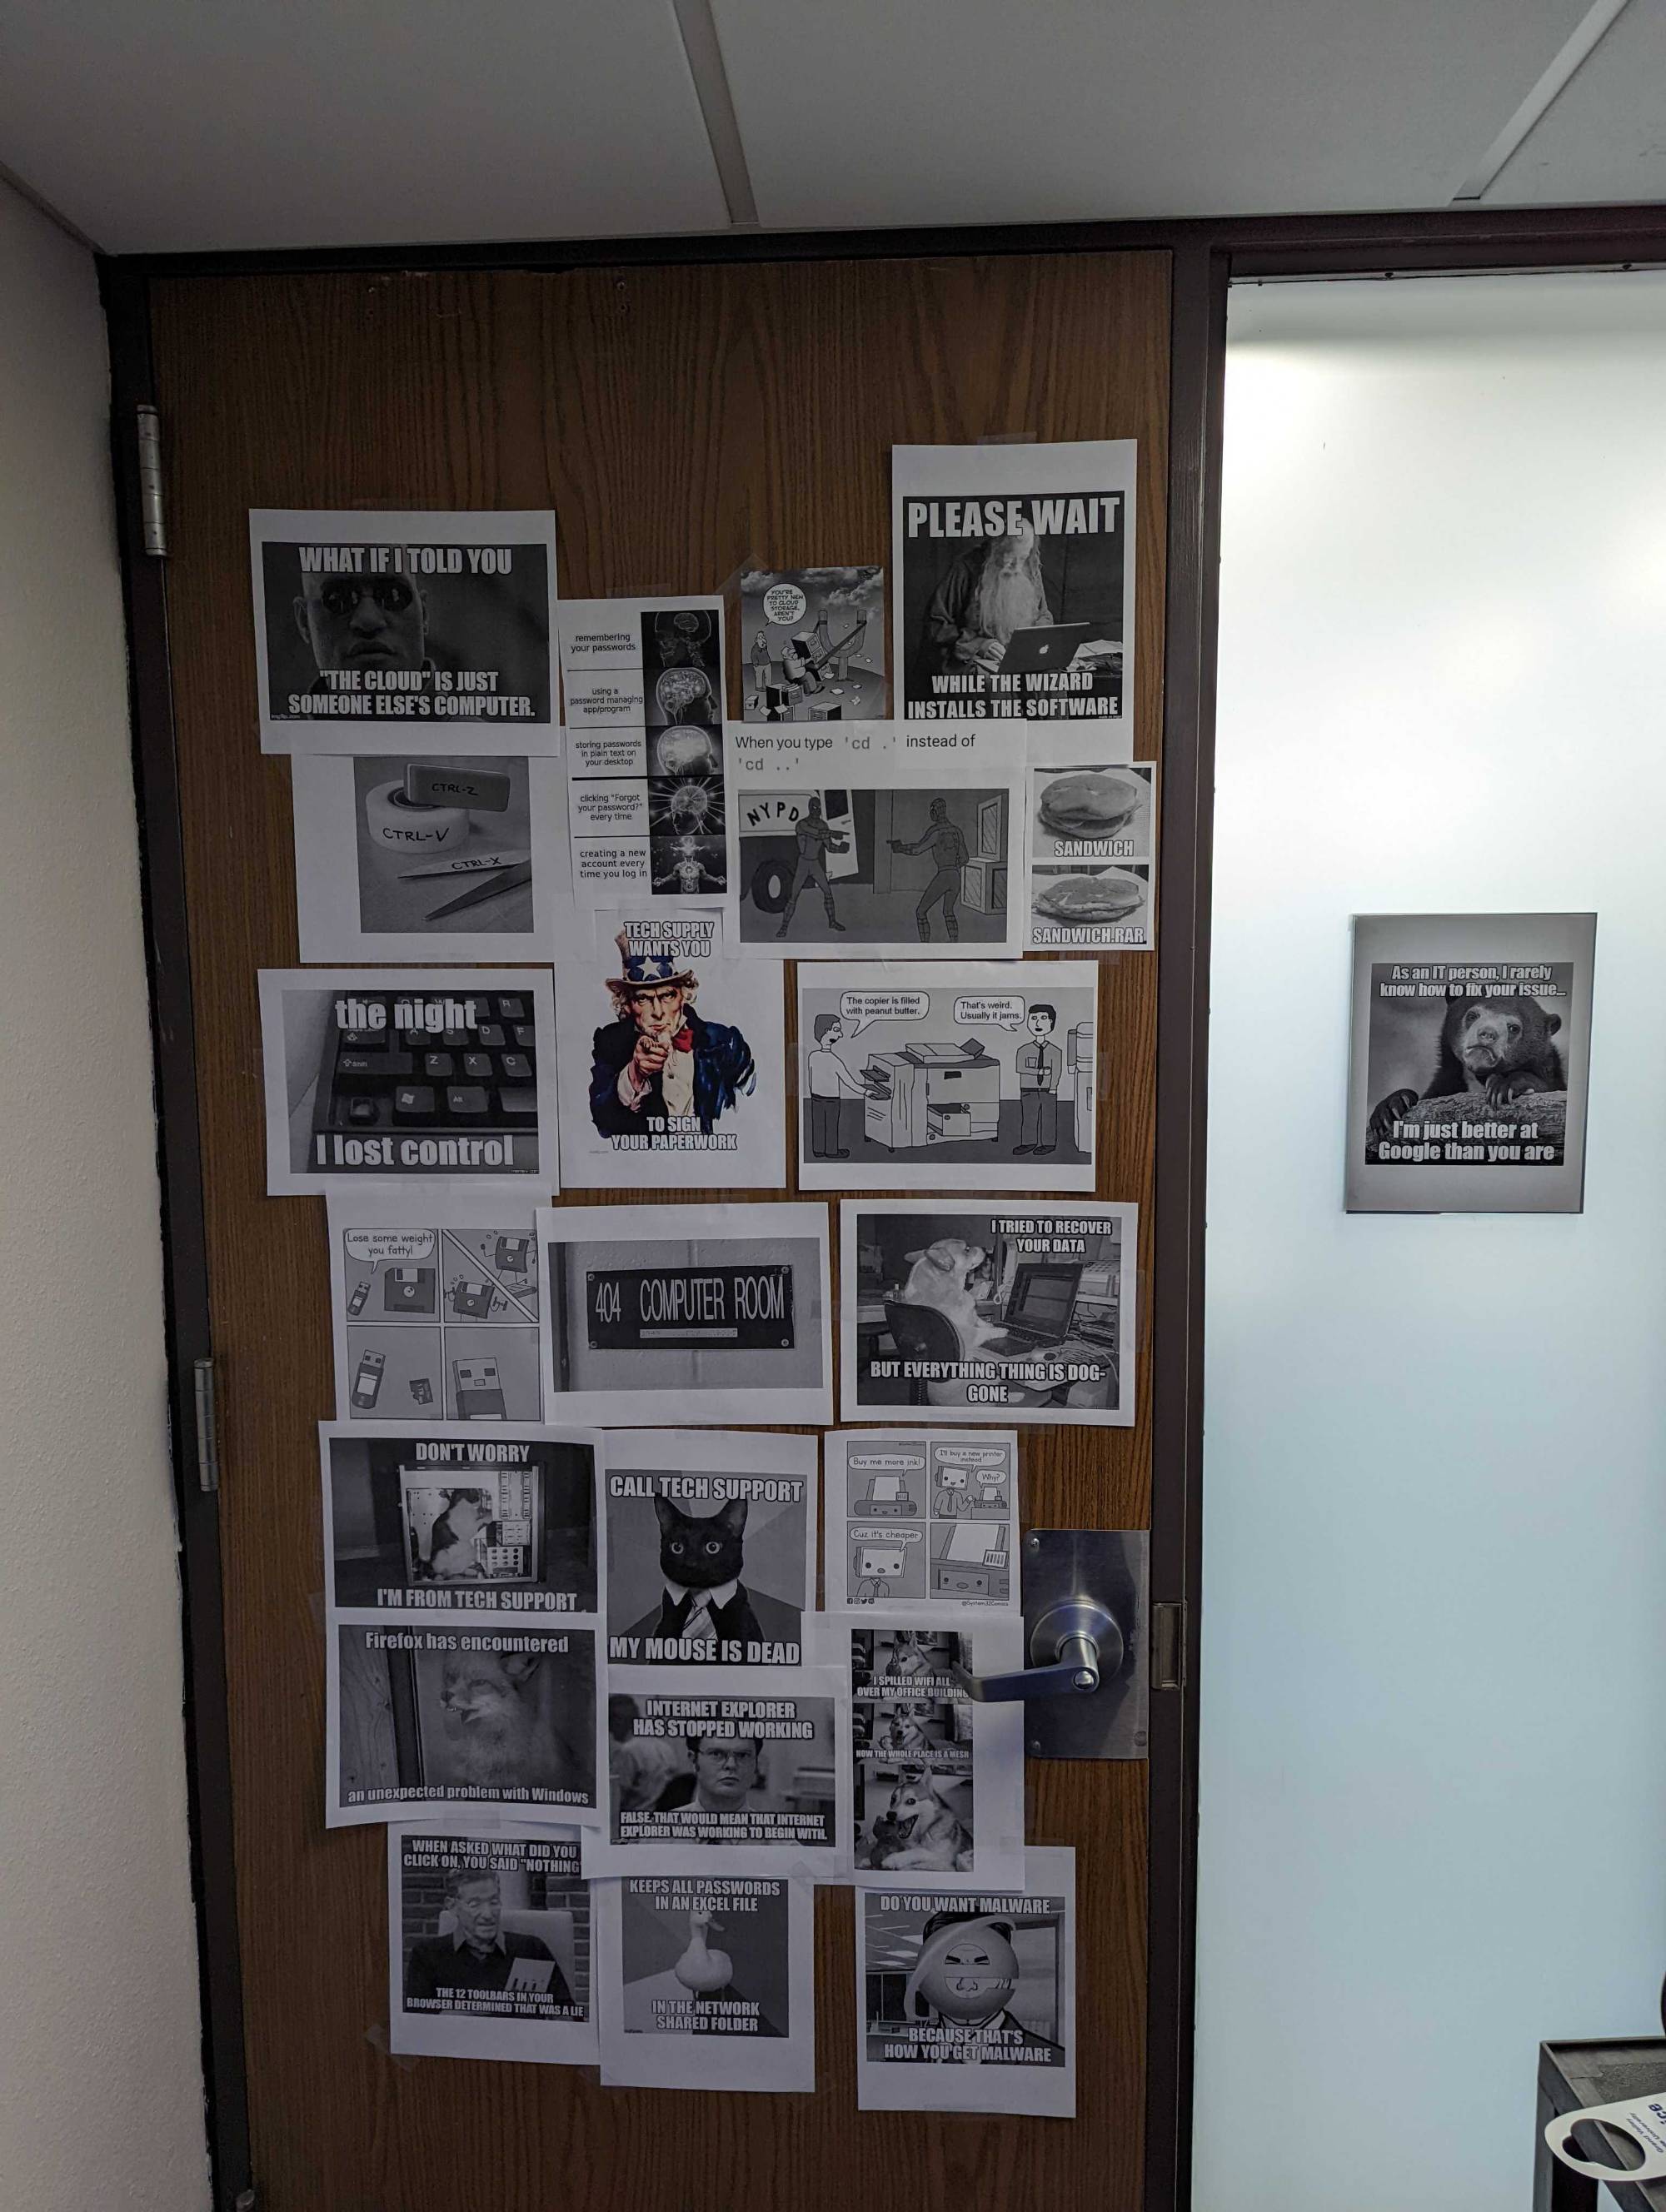 wooden door with black and white photos/memes taped to it